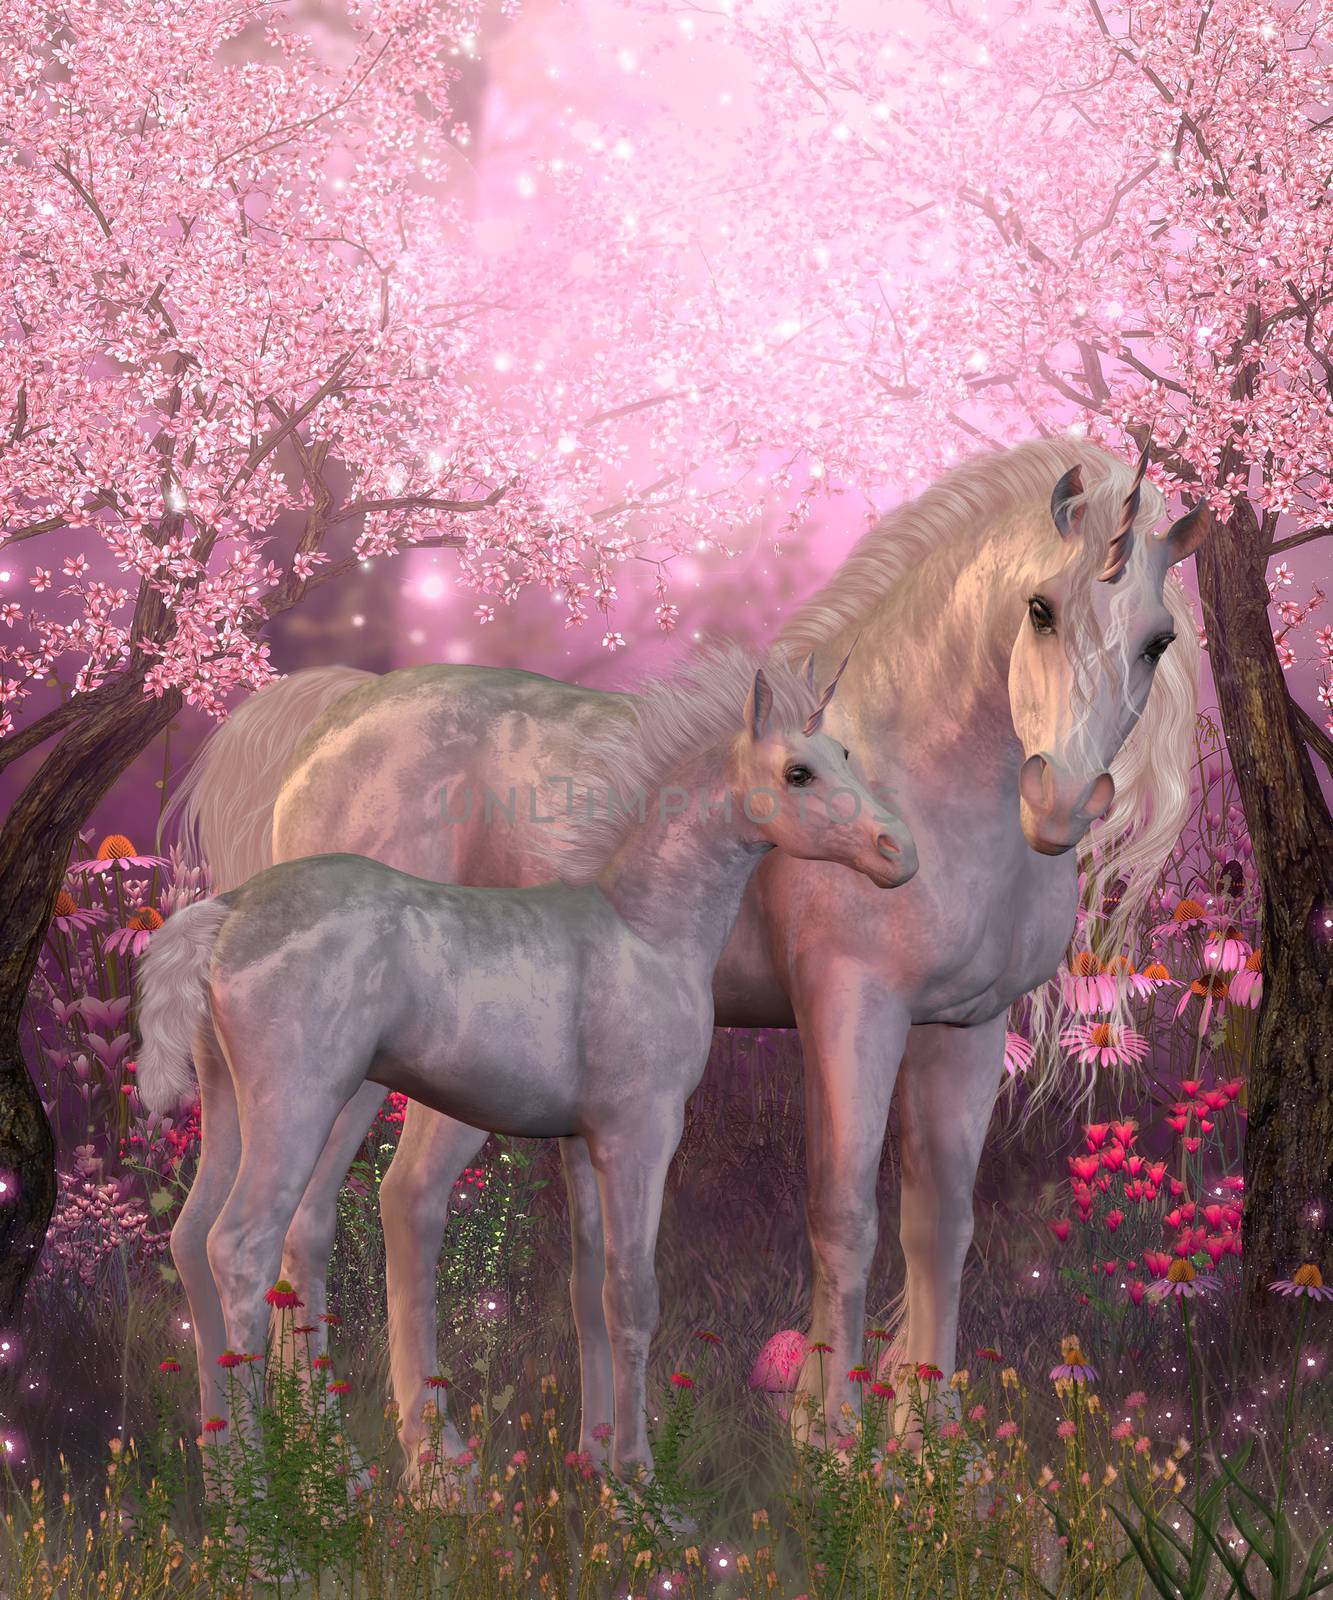 Spring finds a white Unicorn mare and foal resting under blossoming cherry trees.